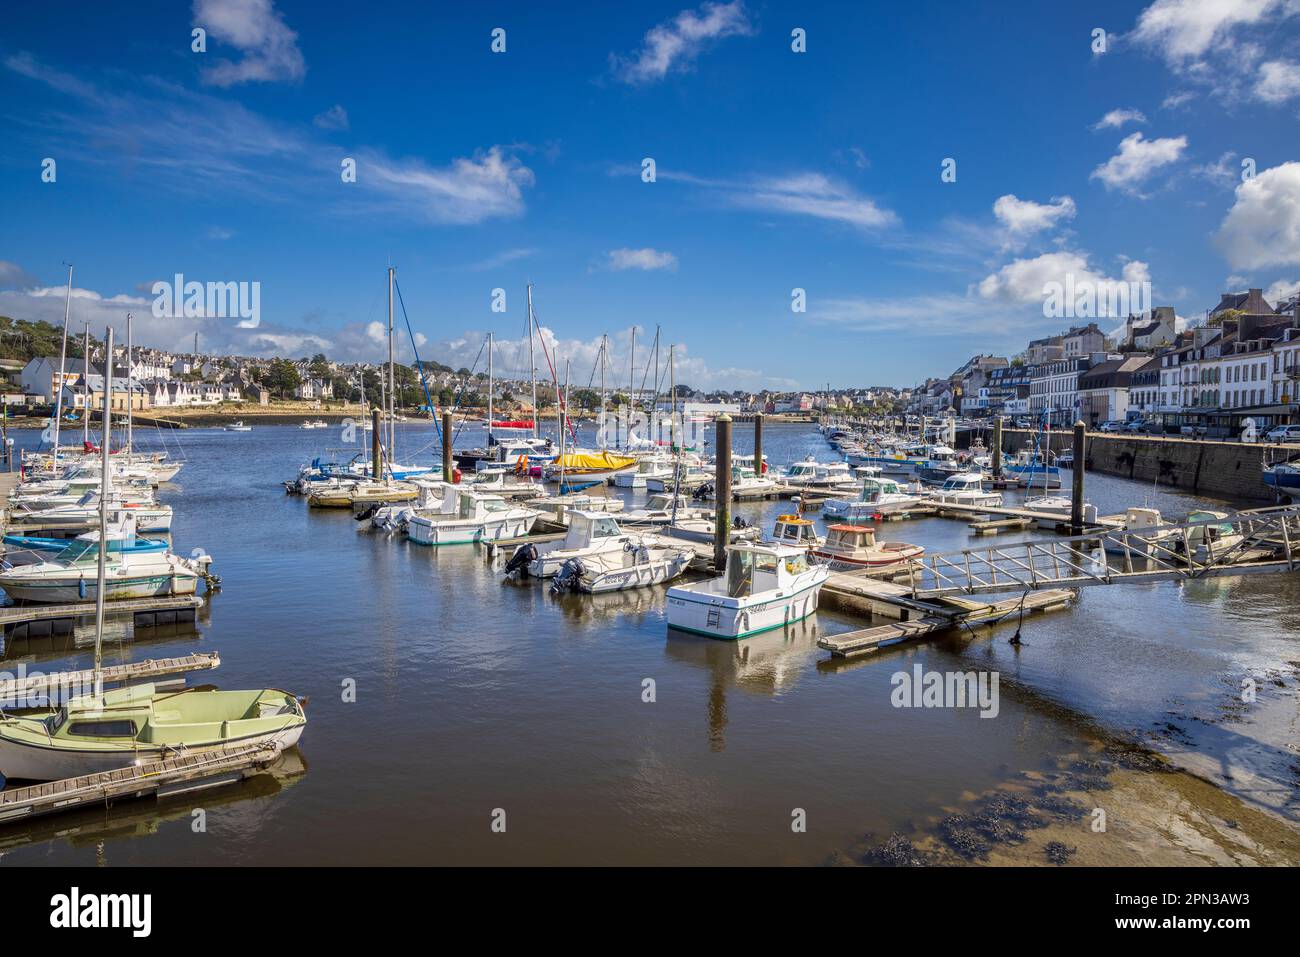 The harbour at Audierne on the Goyen river, Brittany, France Stock Photo